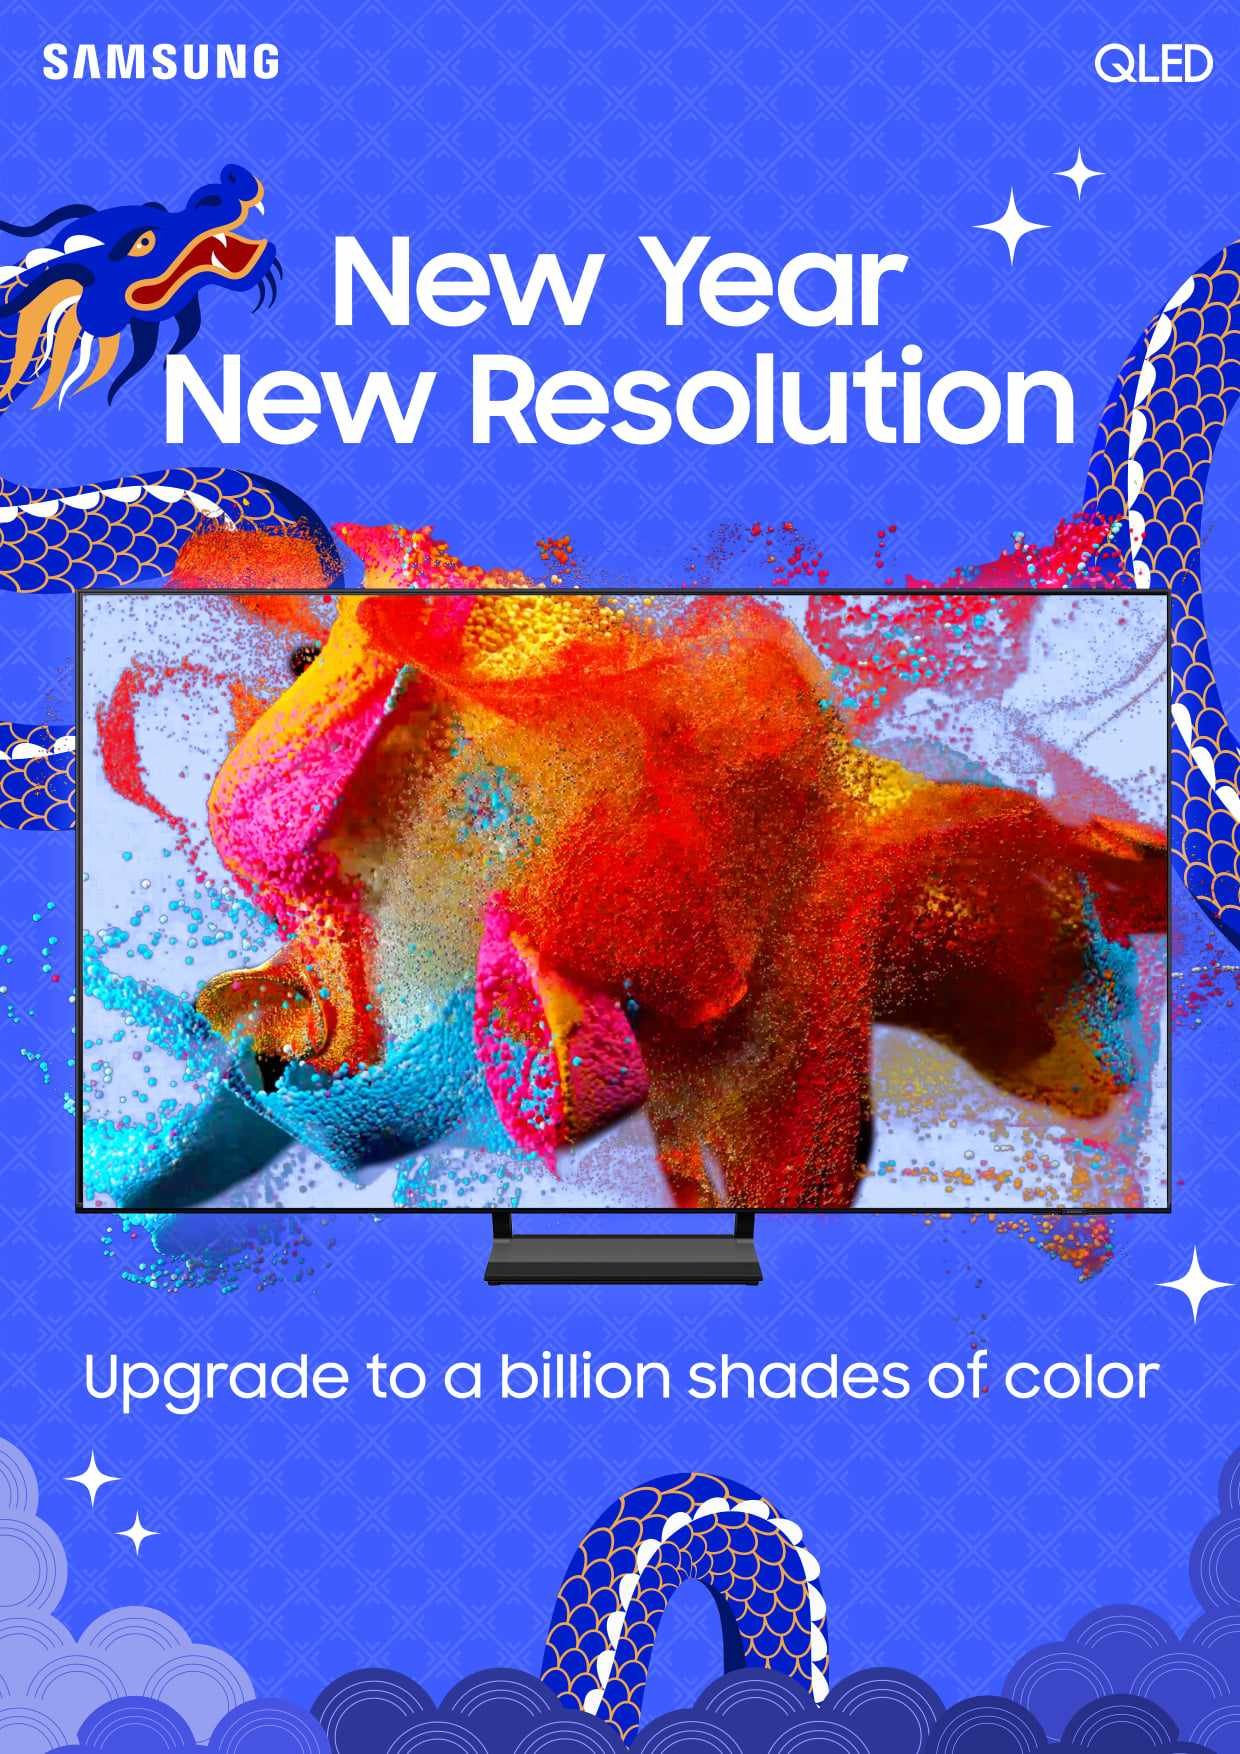 Upgrade your Viewing Experience this Lunar New Year with Samsungs Lucky Deals